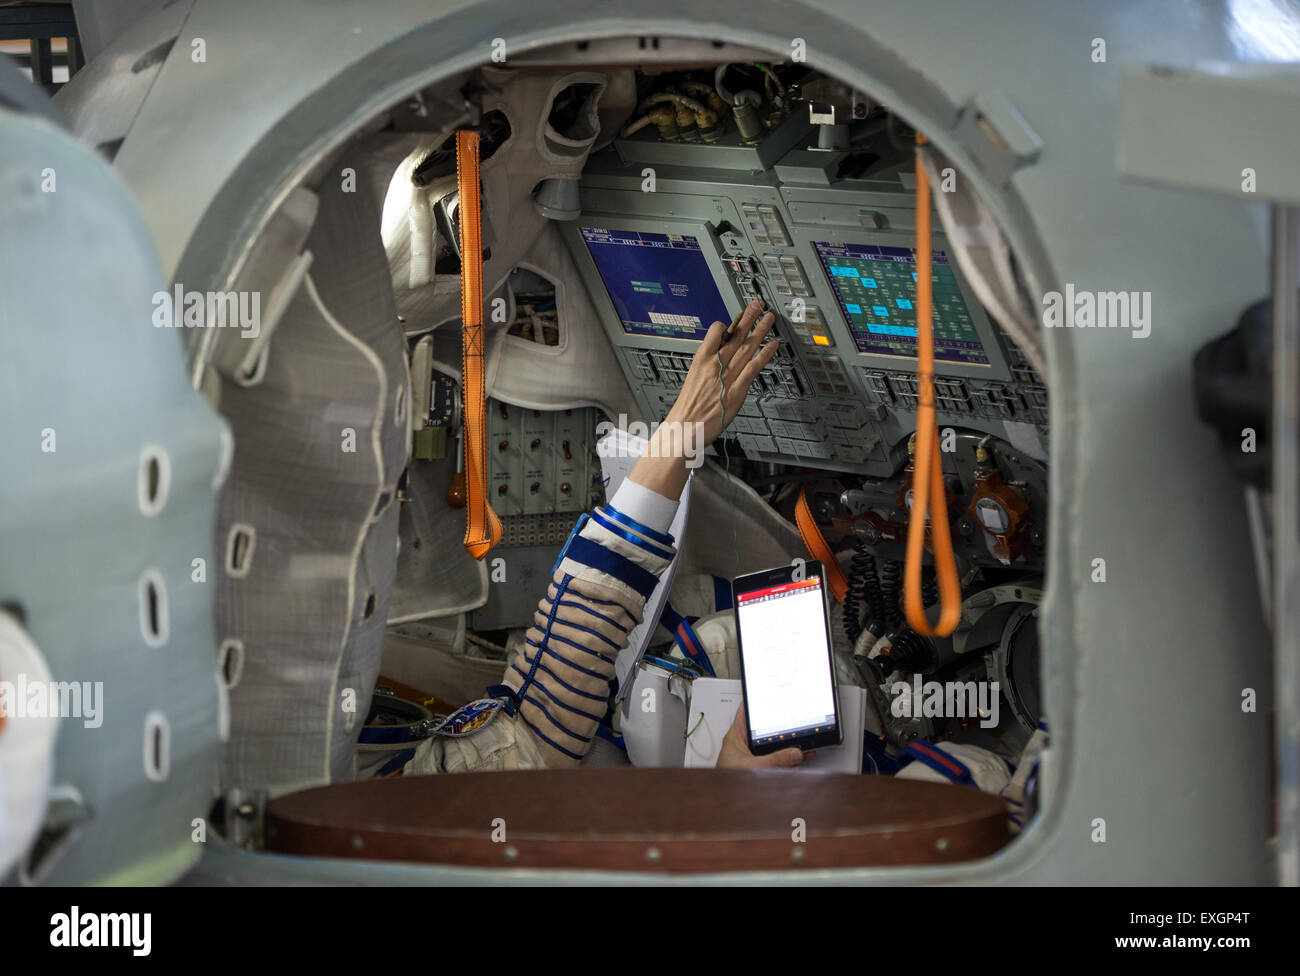 Japan Aerospace Exploration Agency astronaut Kimiya Yui participates in the second day of qualification exams with Russian cosmonaut Oleg Kononenko and NASA astronaut Kjell Lindgren, Thursday, May 7, 2015 at the Gagarin Cosmonaut Training Center (GCTC) in Star City, Russia. The Expedition 44/45 trio is preparing for launch to the International Space Station in their Soyuz TMA-17M spacecraft from the Baikonur Cosmodrome in Kazakhstan. Stock Photo